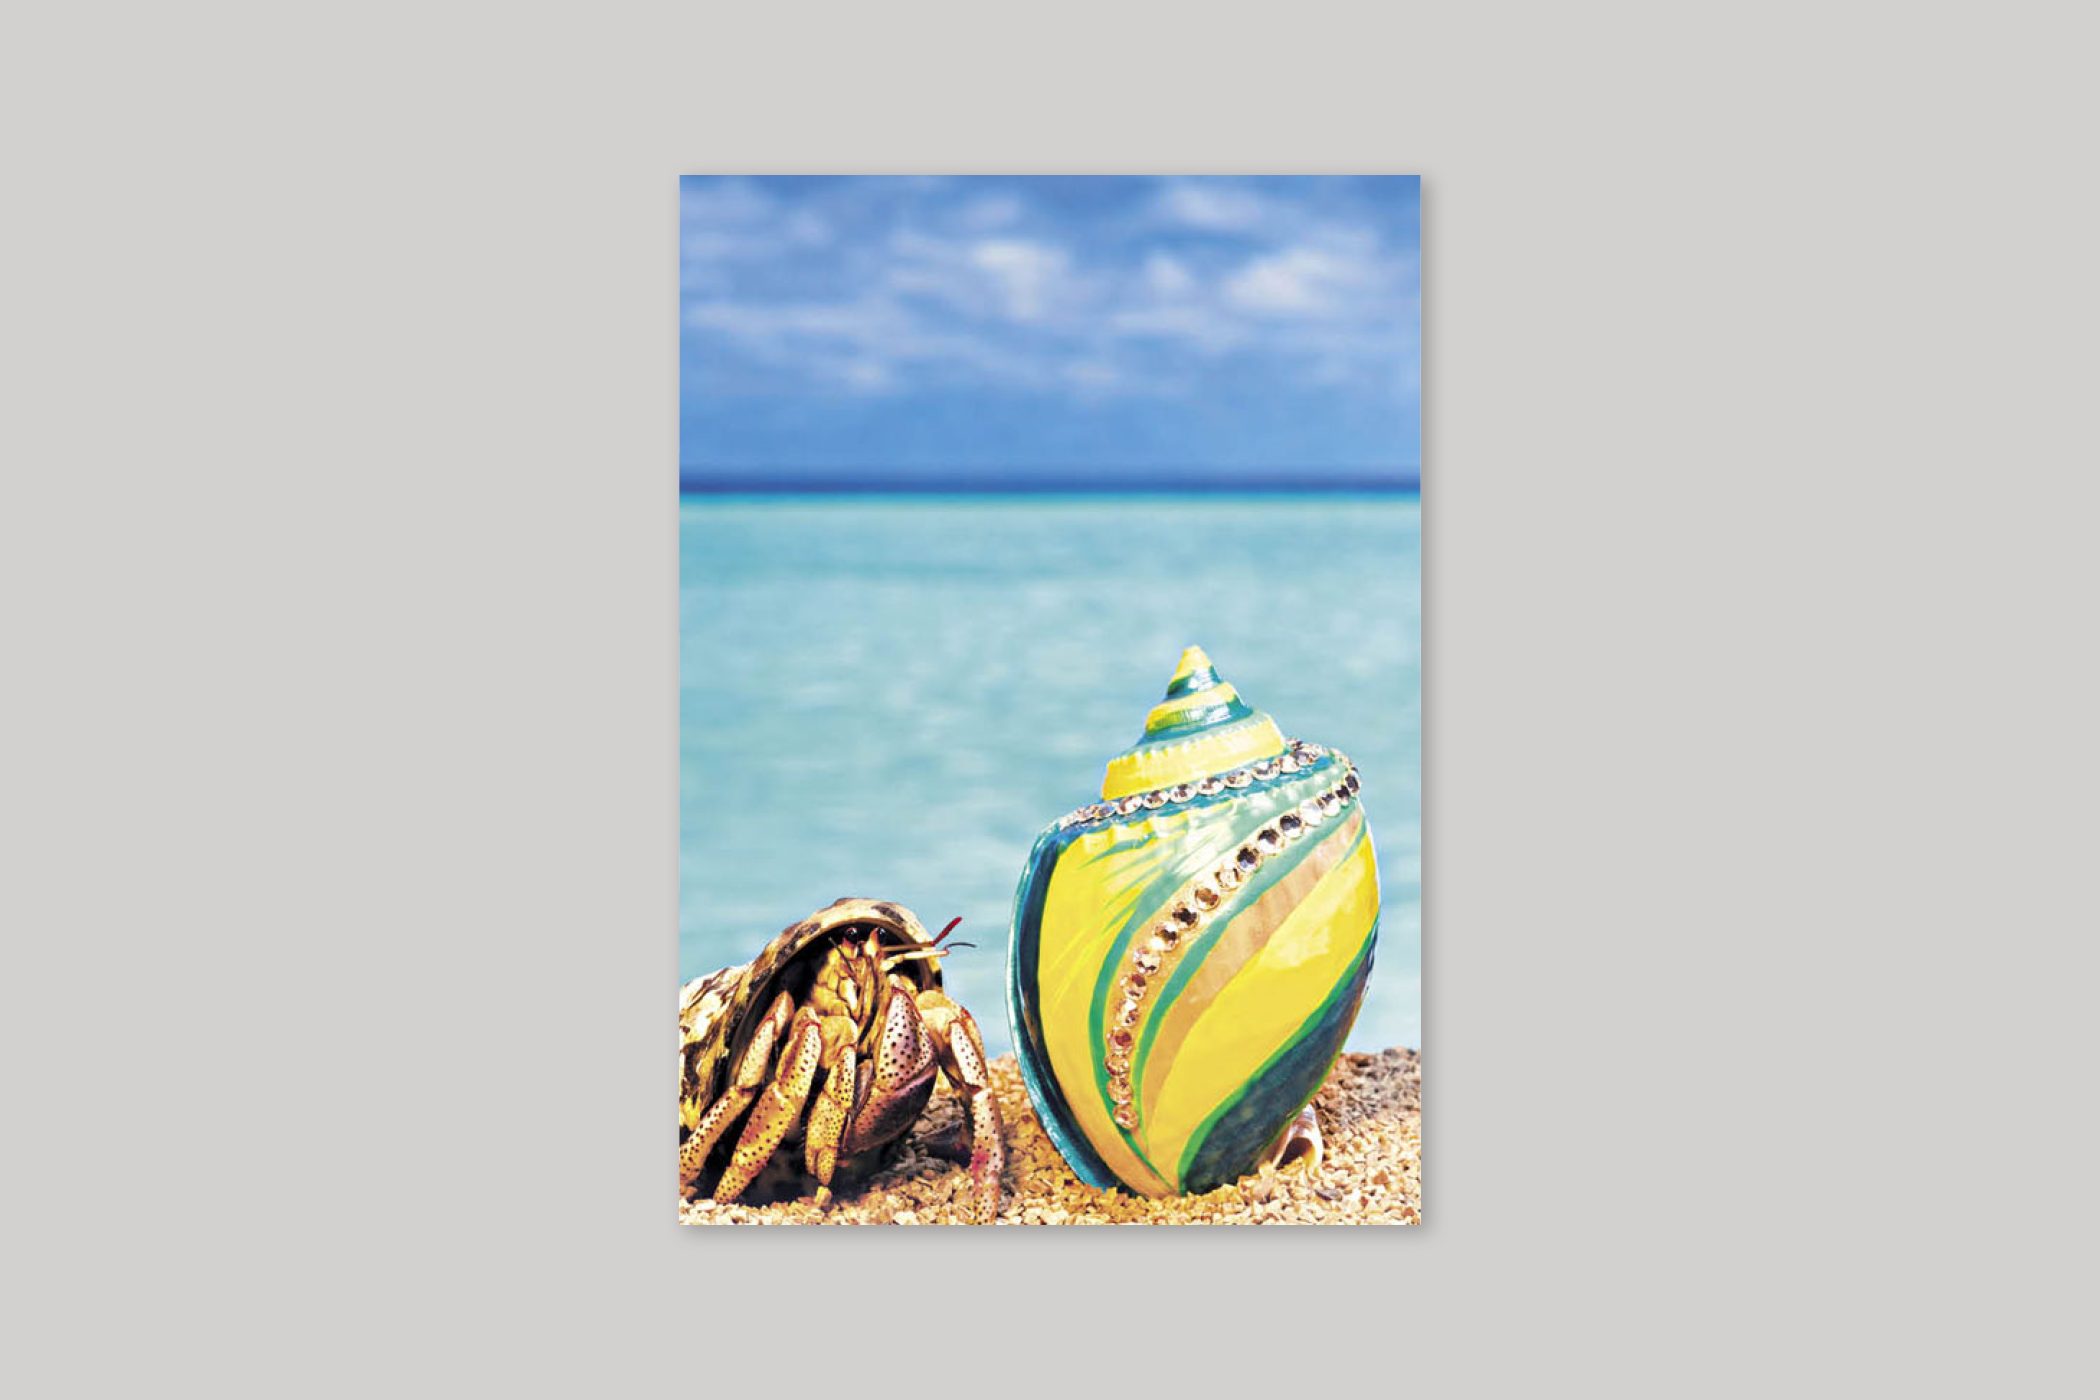 New Shell new home card from Exposure range of photographic cards by Icon.